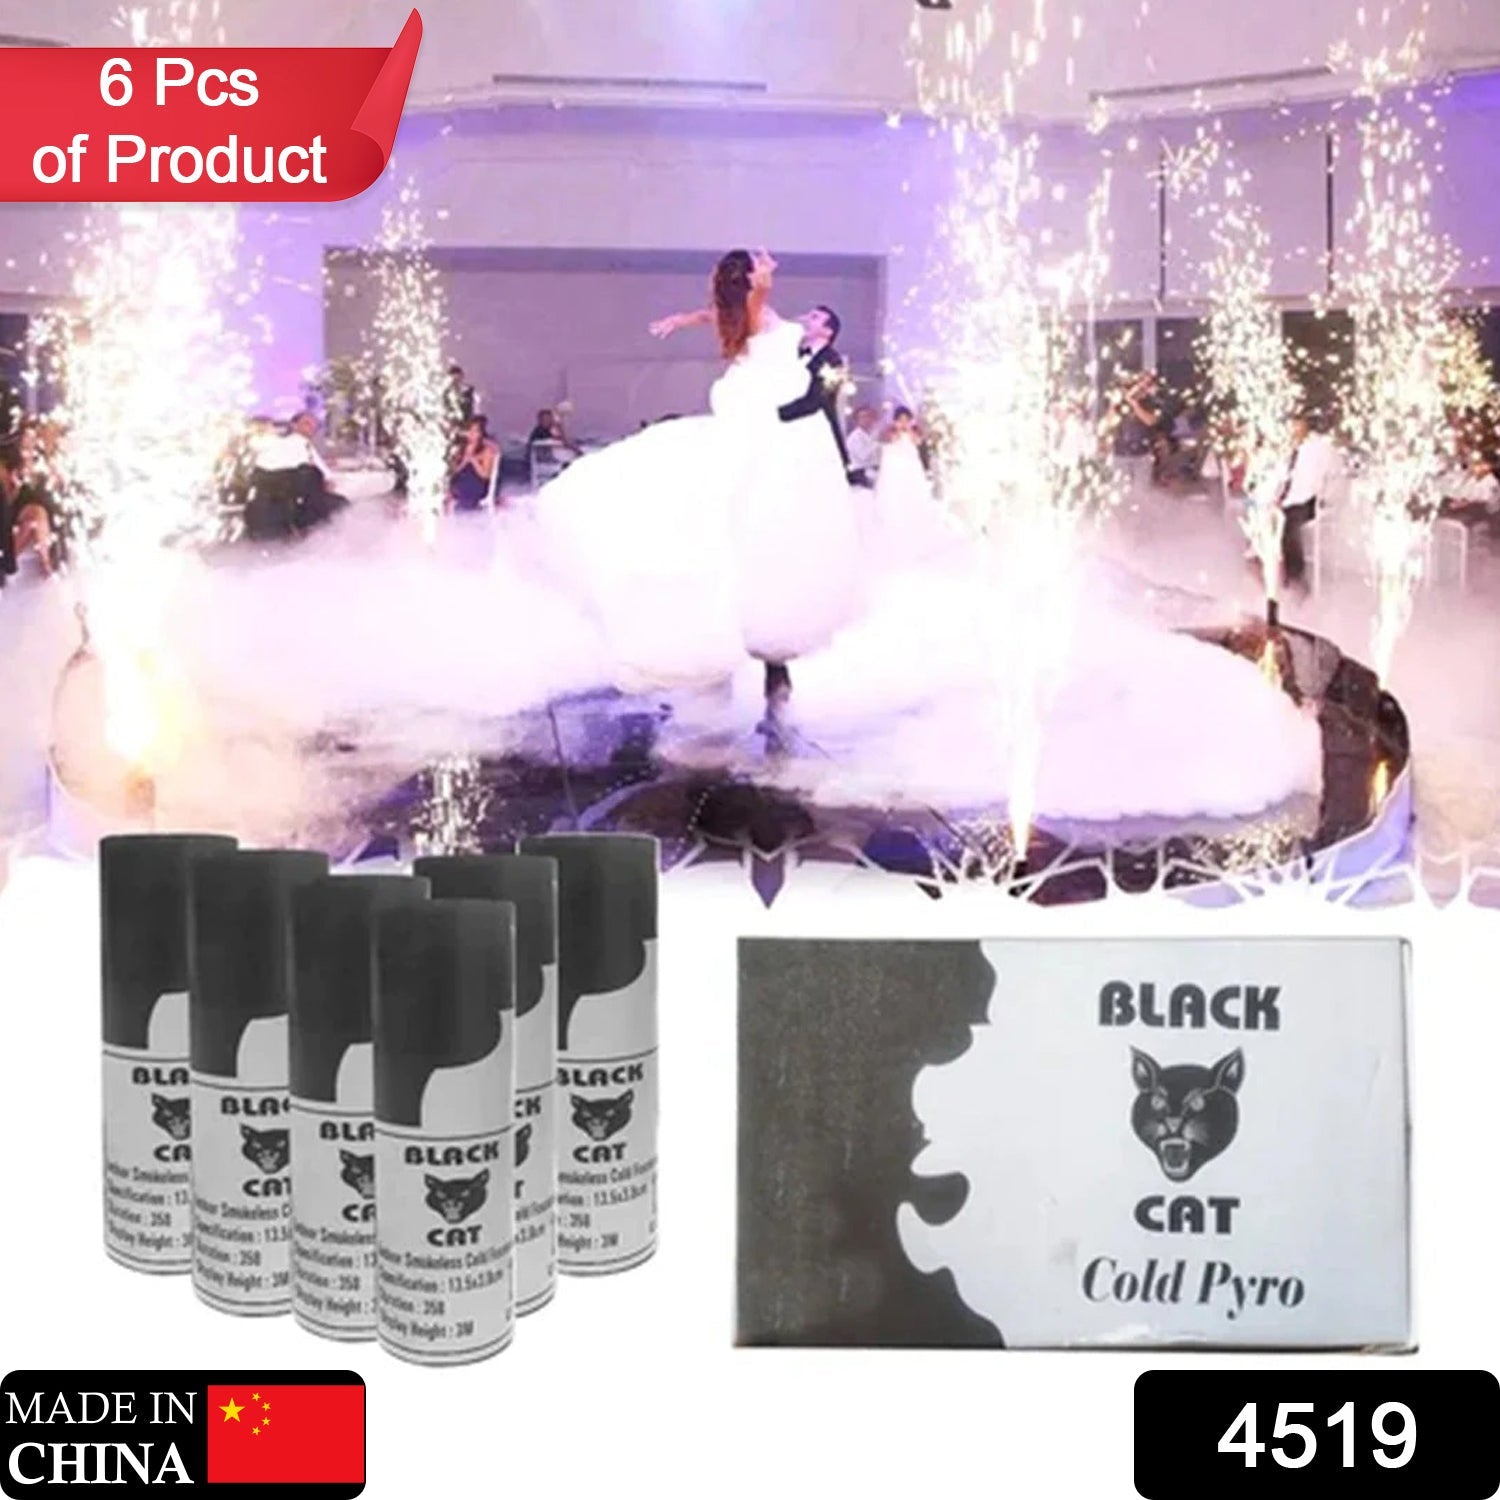 4519 Cold Payro Refill Cold Fire Shower of Sparks Use For Parties Functions Events and All Kind of Celebrations (Pack Of 6 Pc ) DeoDap